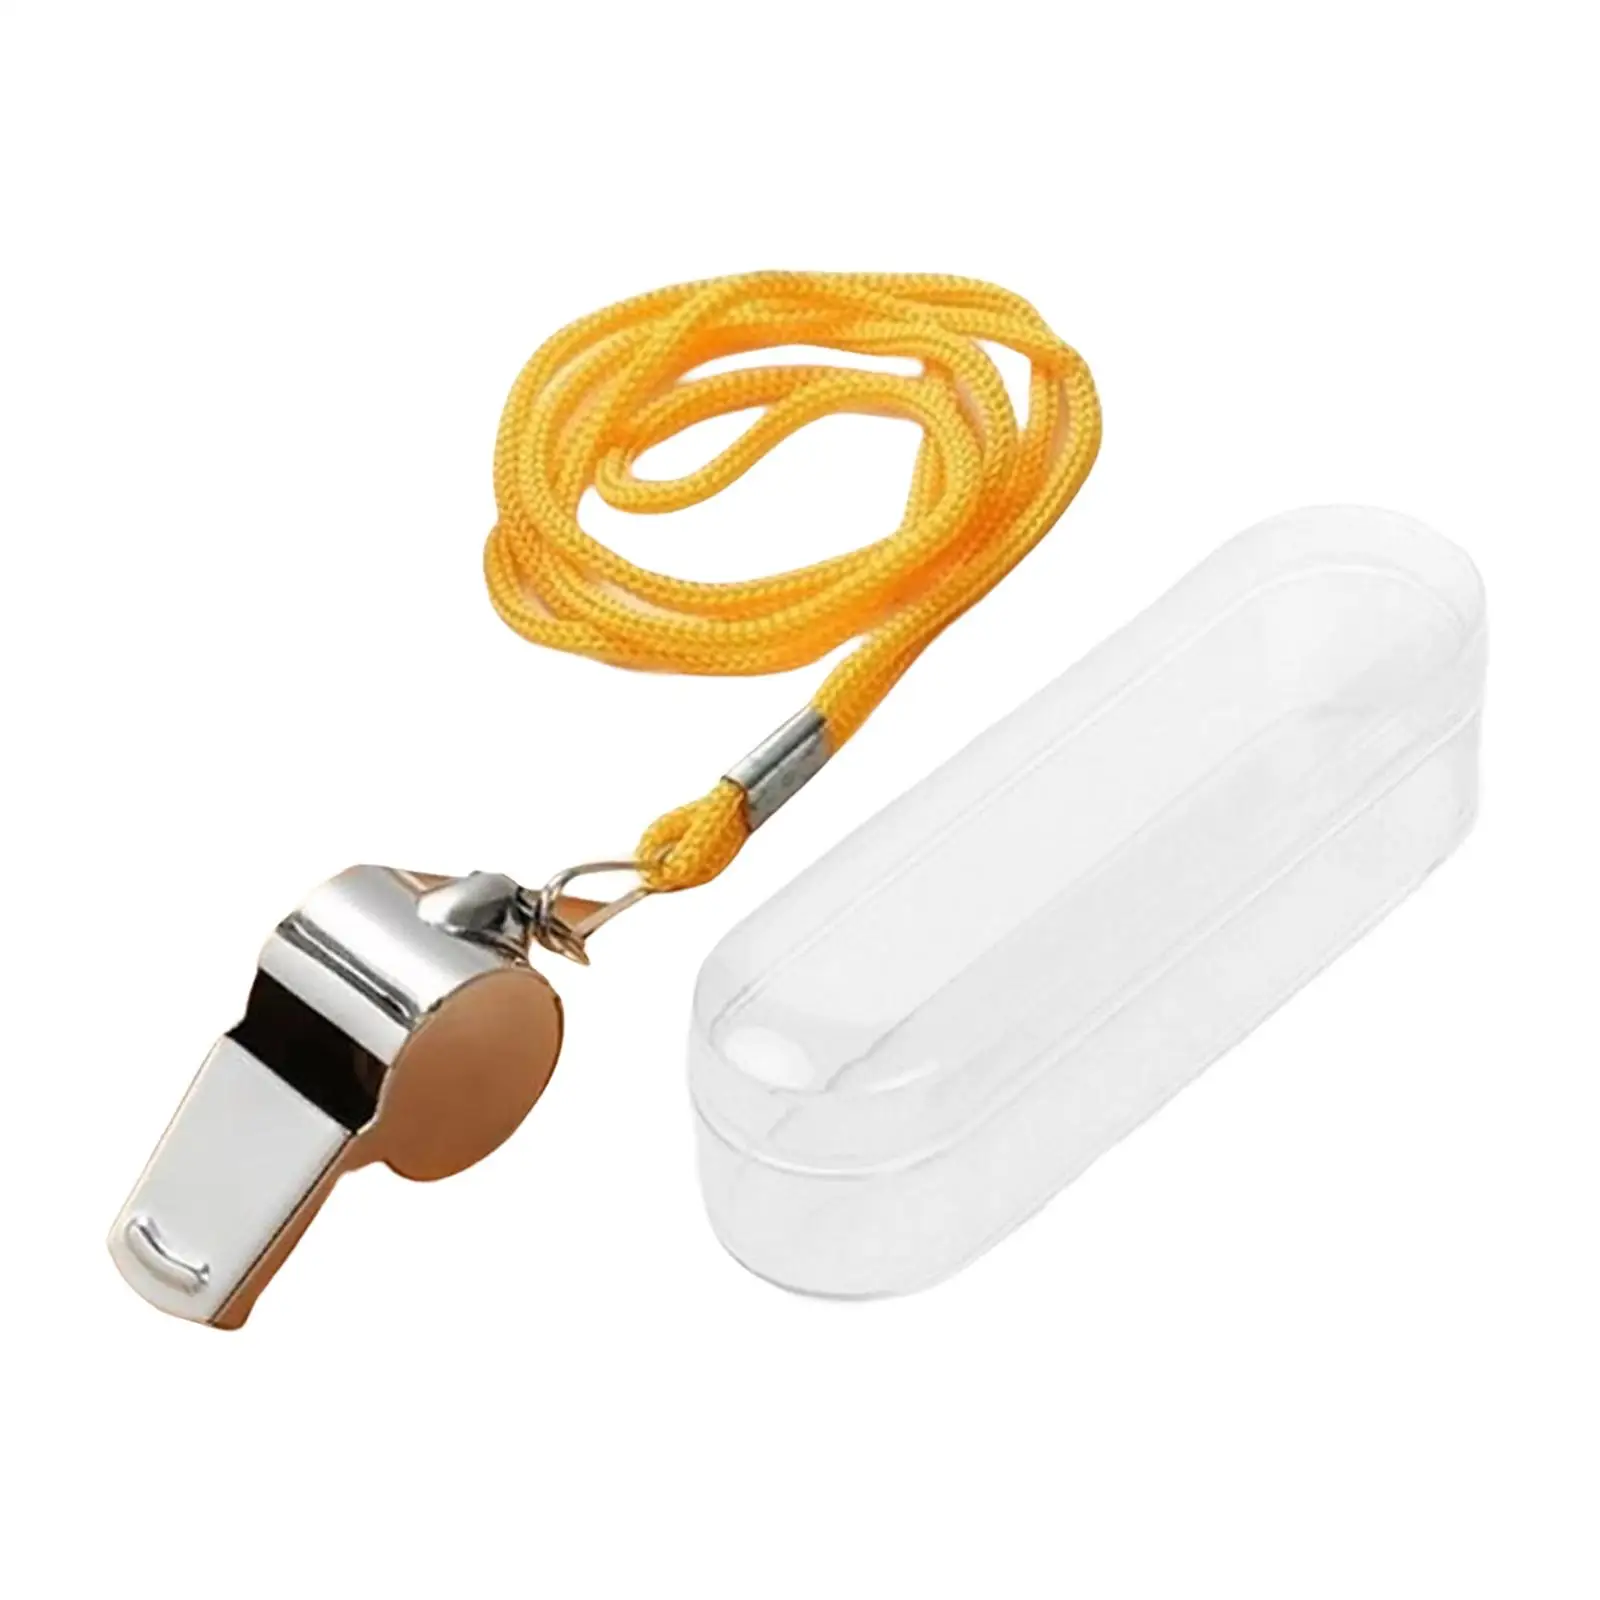 Stainless Steel Sports Whistles Loud Crisp Sound Referee Whistle Metal Whistle for Volleyball Soccer Emergency Training Outdoor